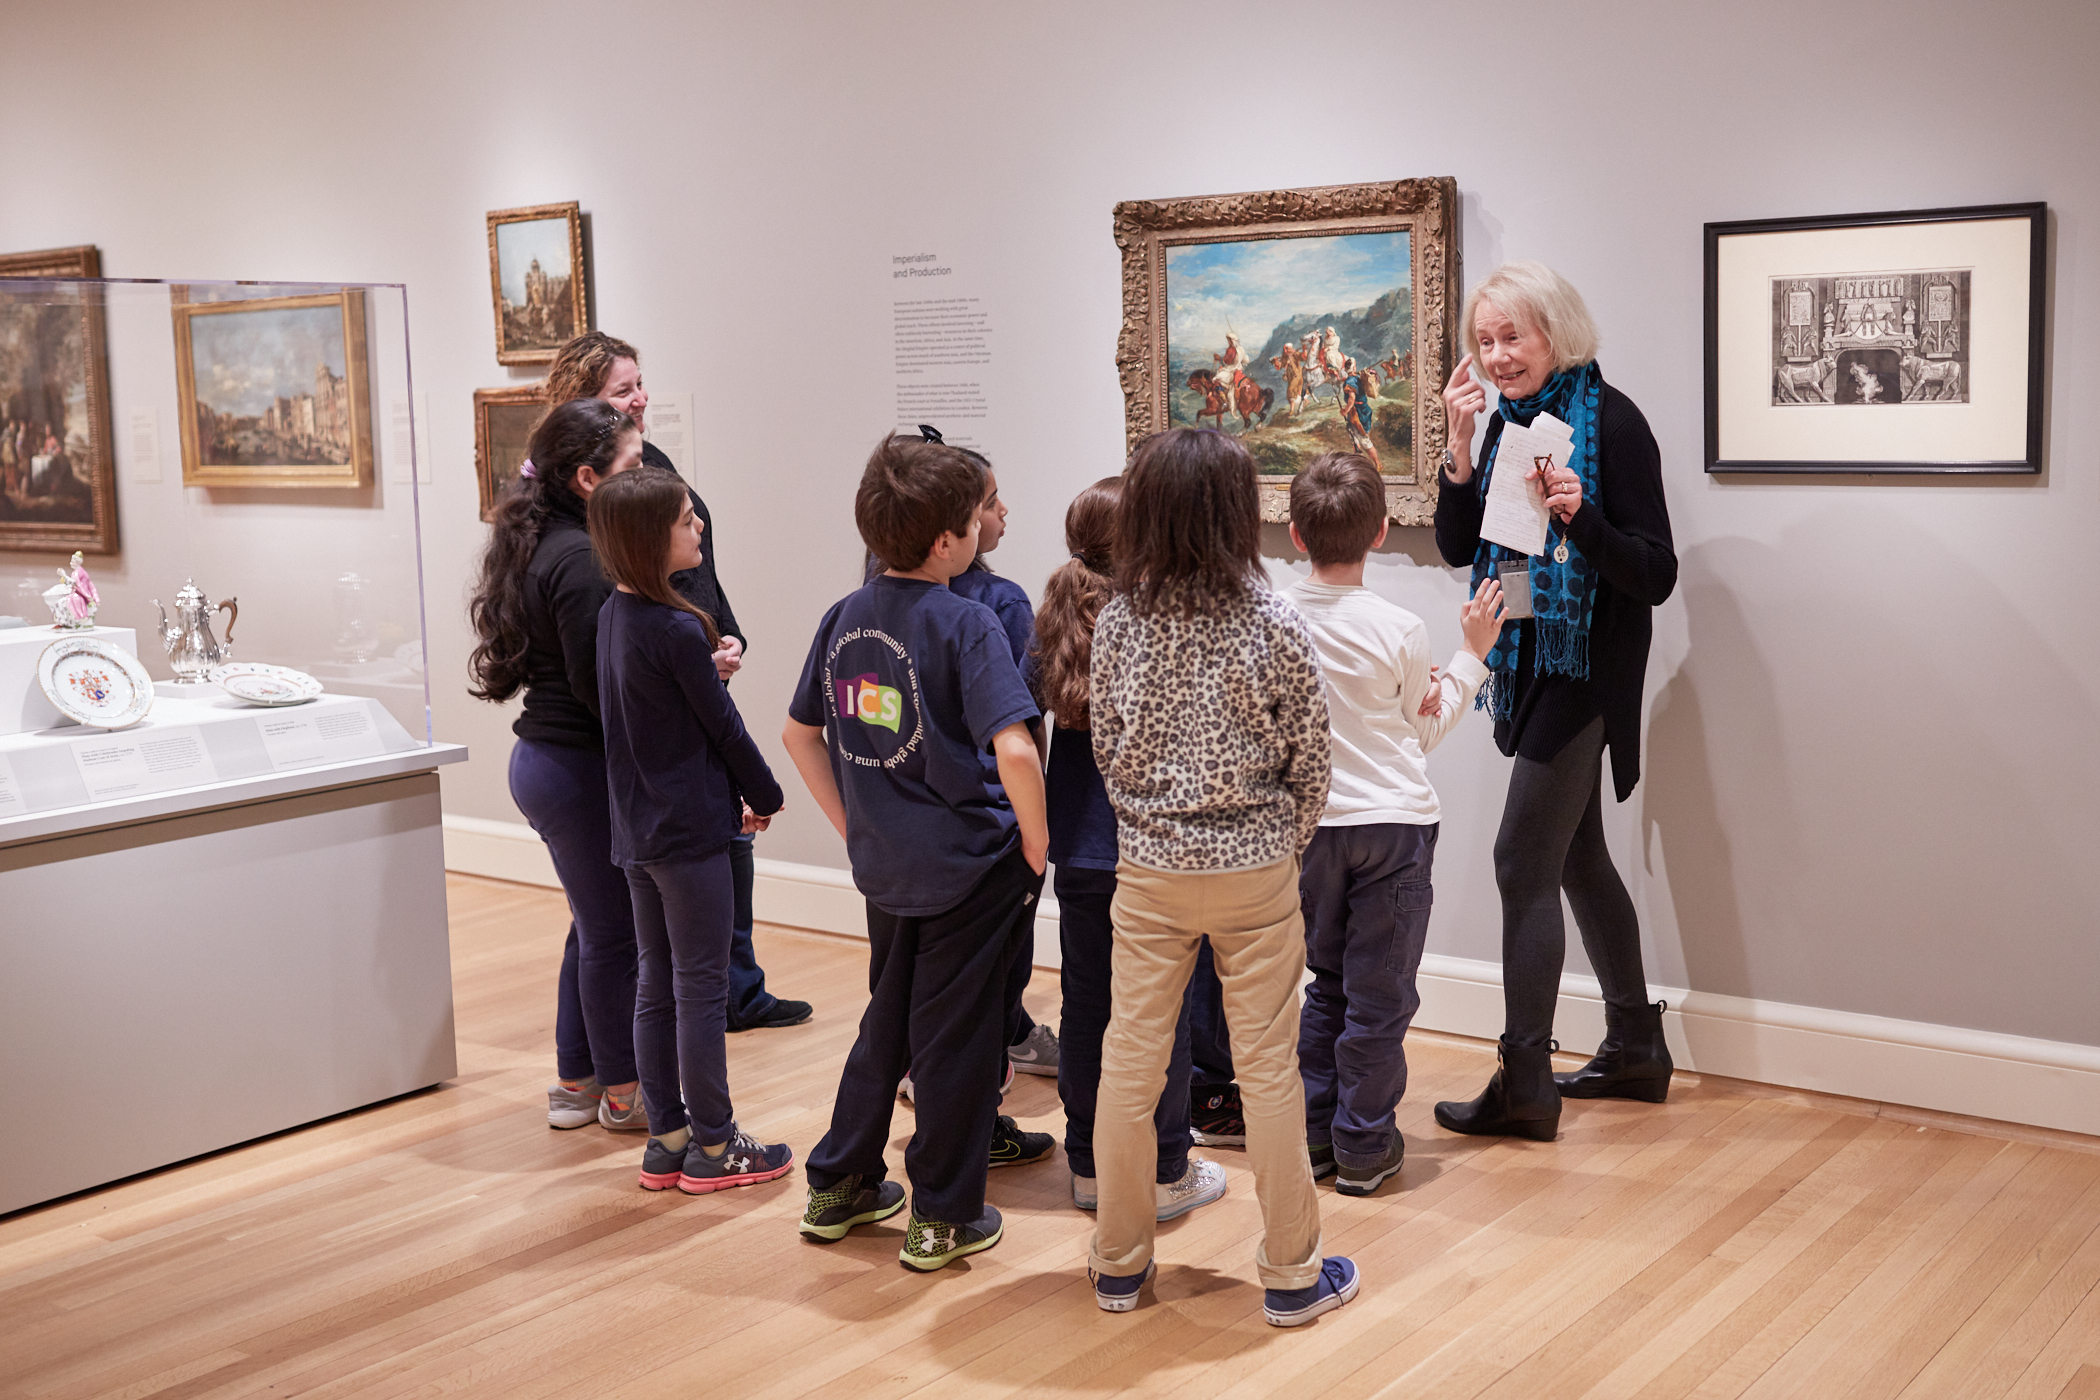 2018 Docent Jane Koster leading students from the International School on a tour in 2018. Photo by Erik Gould.